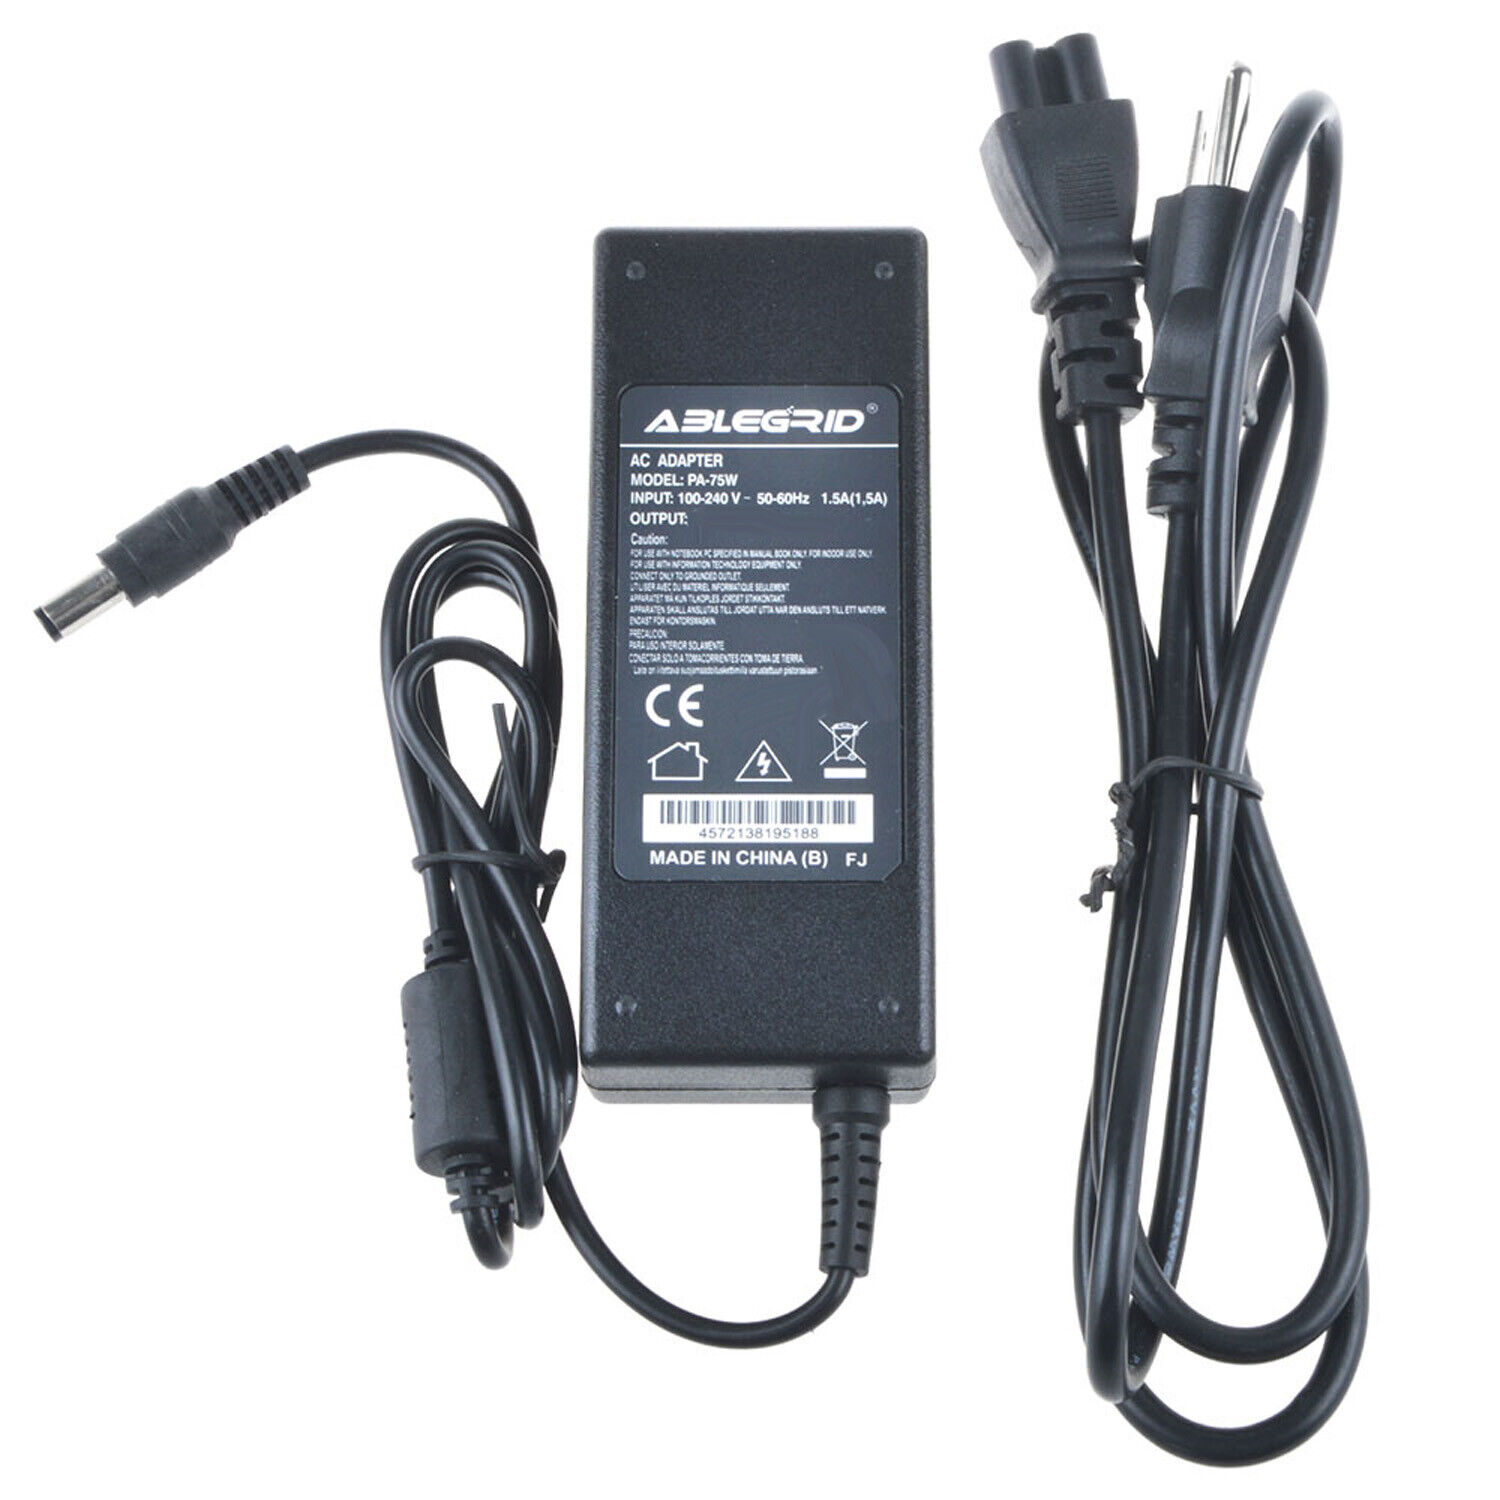 AC Adapter For Toshiba Portege 7200CTe 7220CTe 4000 4005 4010 Power Cord Charger